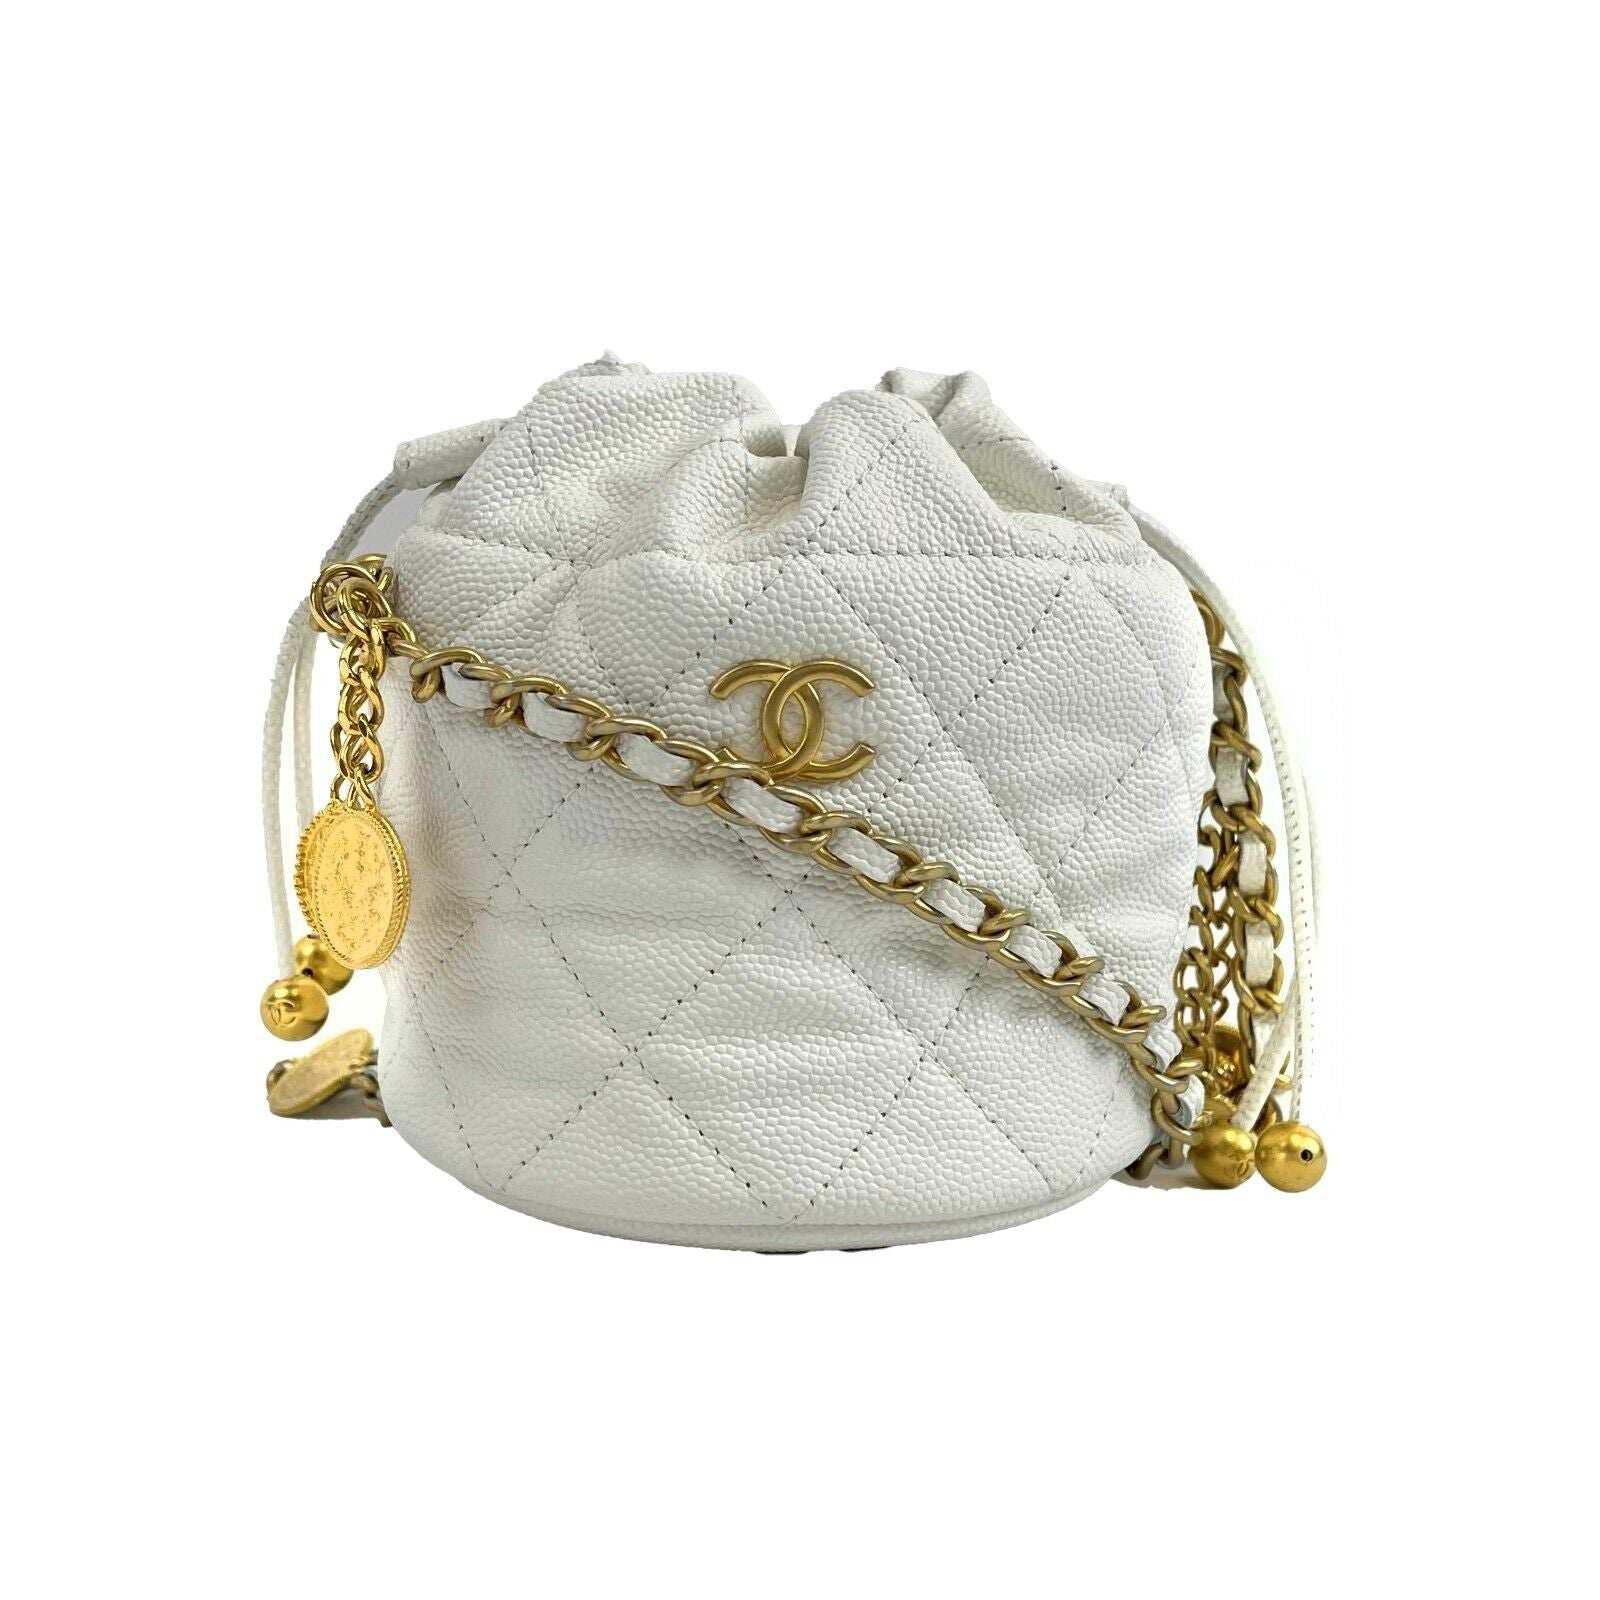 CHANEL - NEW Mini Bucket Bag - White Cavier Leather / God 10 Coins